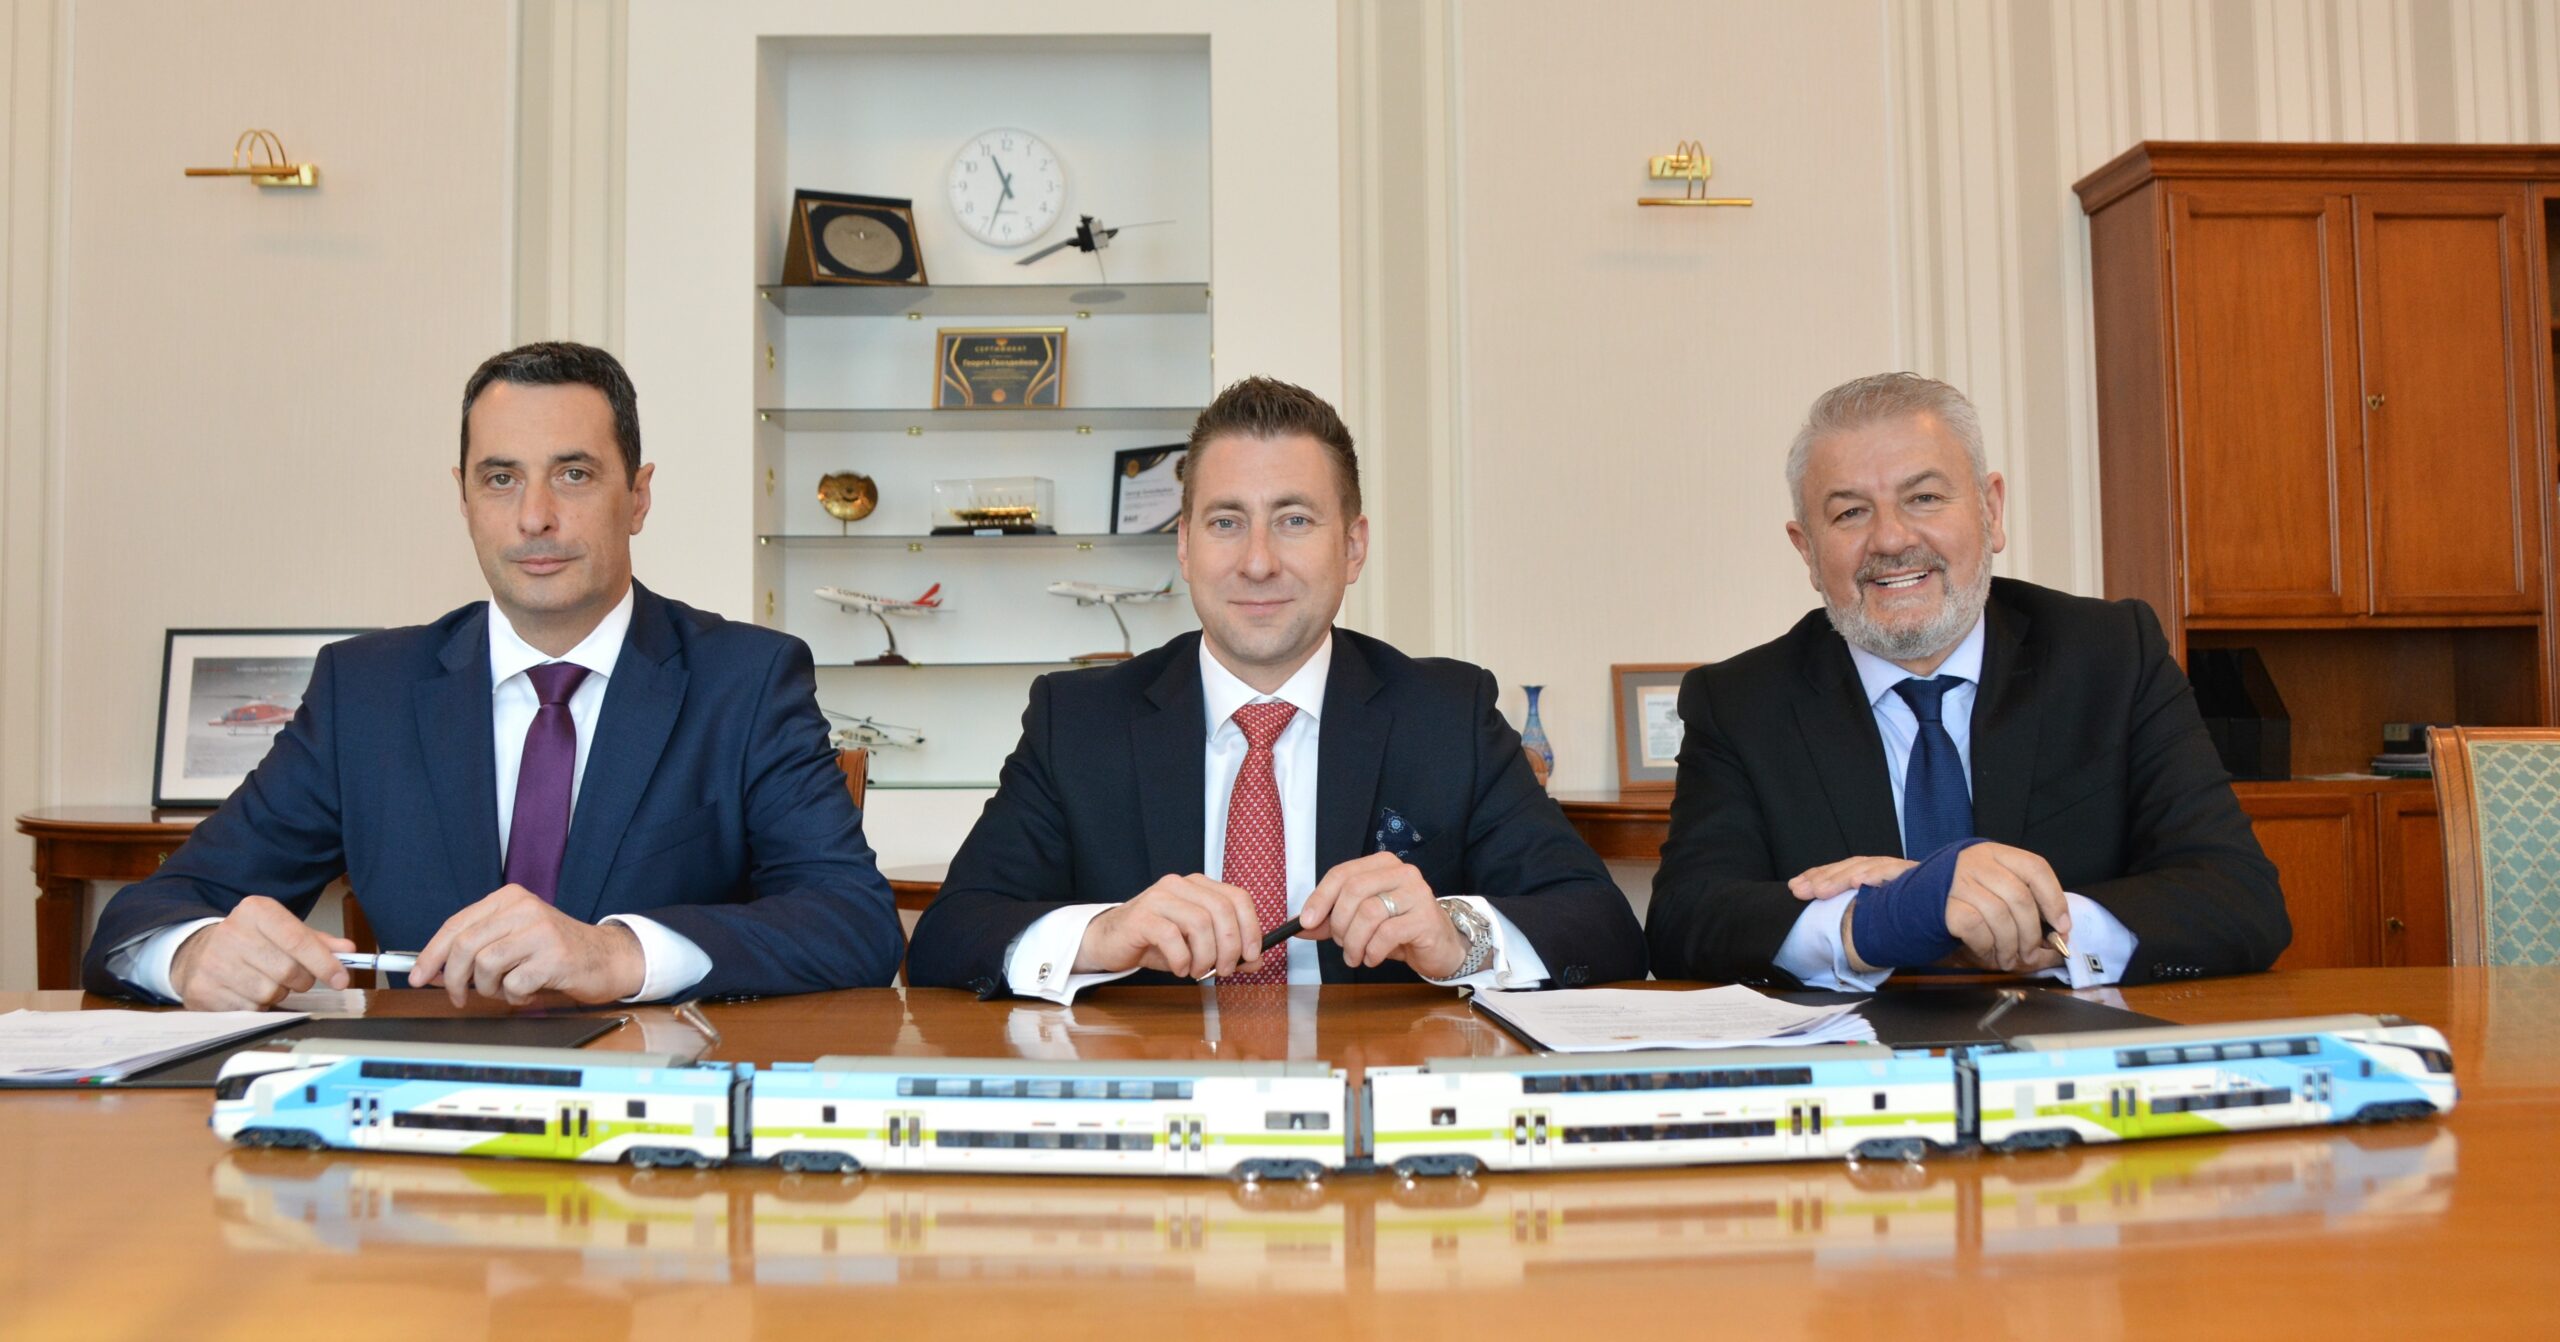 The signing ceremony was held in Sofia, Bulgaria